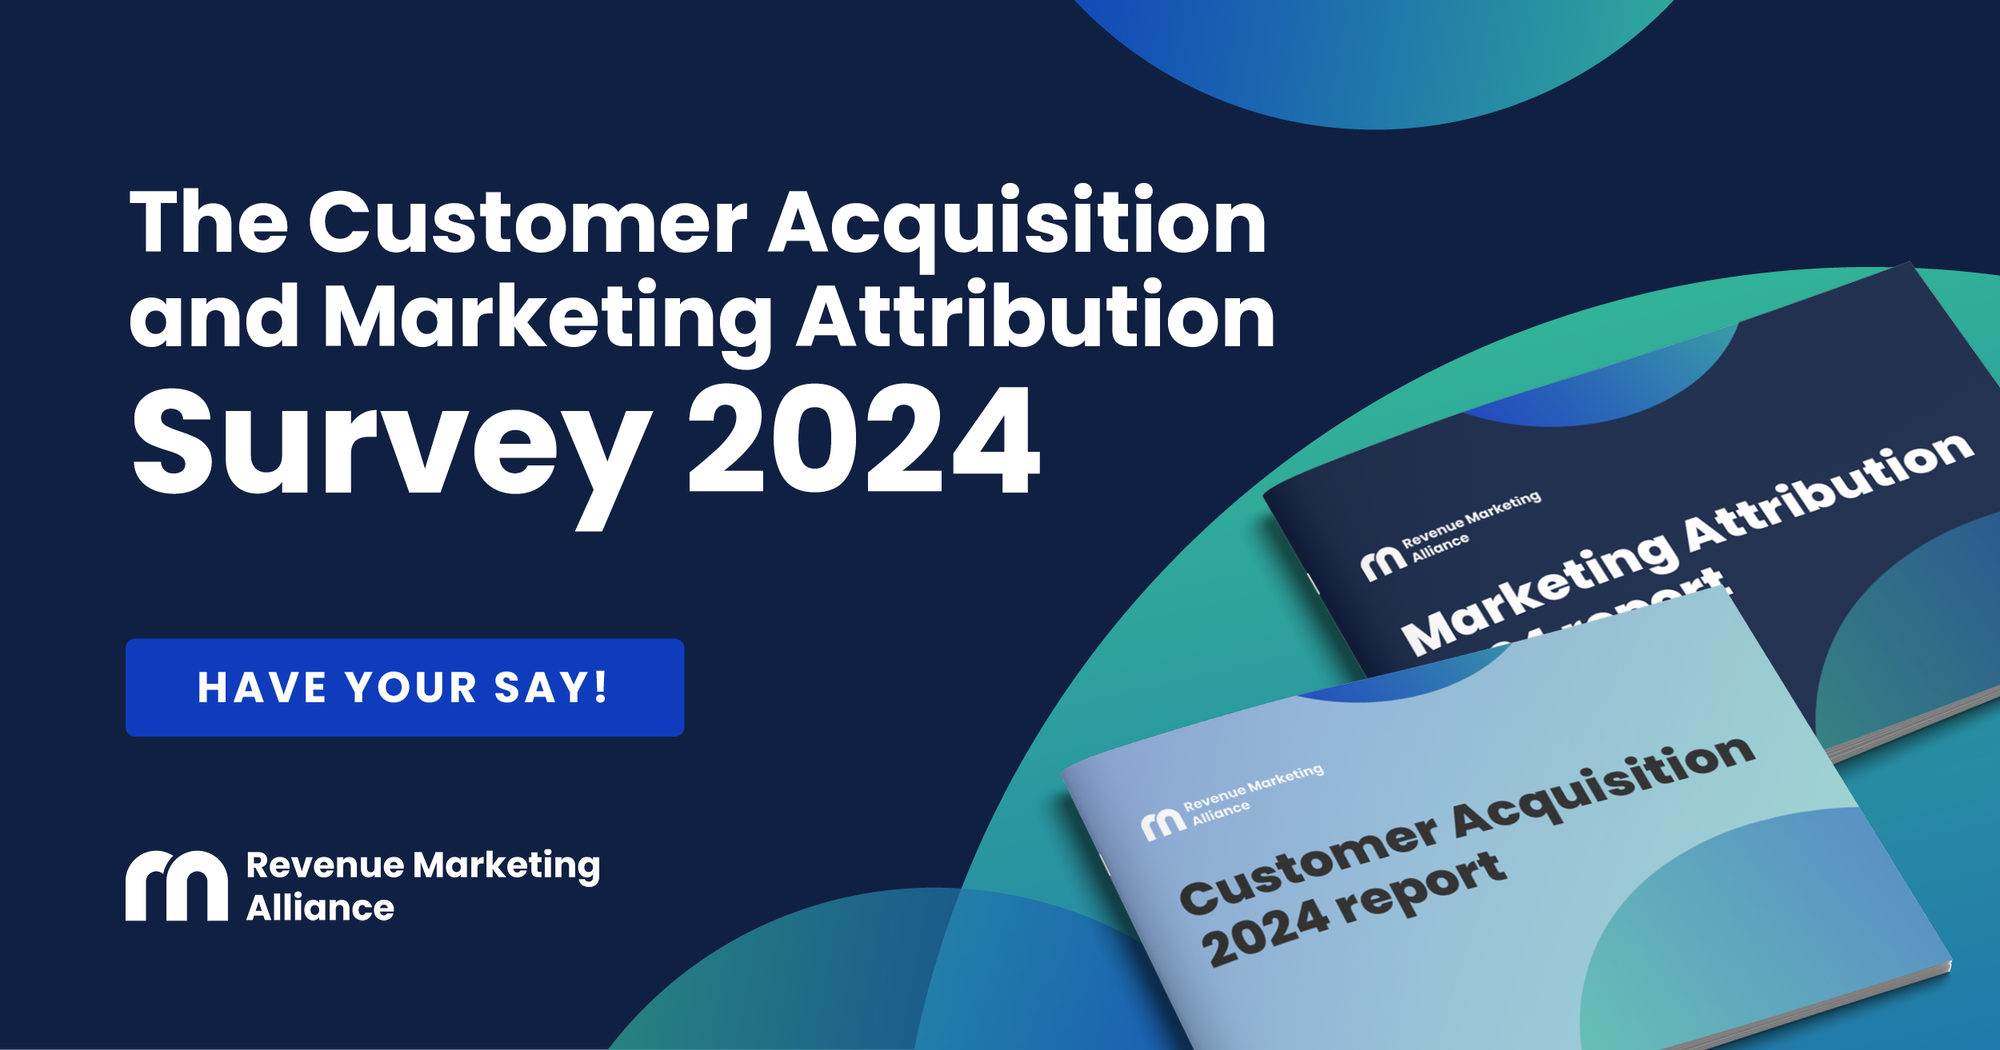 The Customer Acquisition and Marketing Attribution Survey